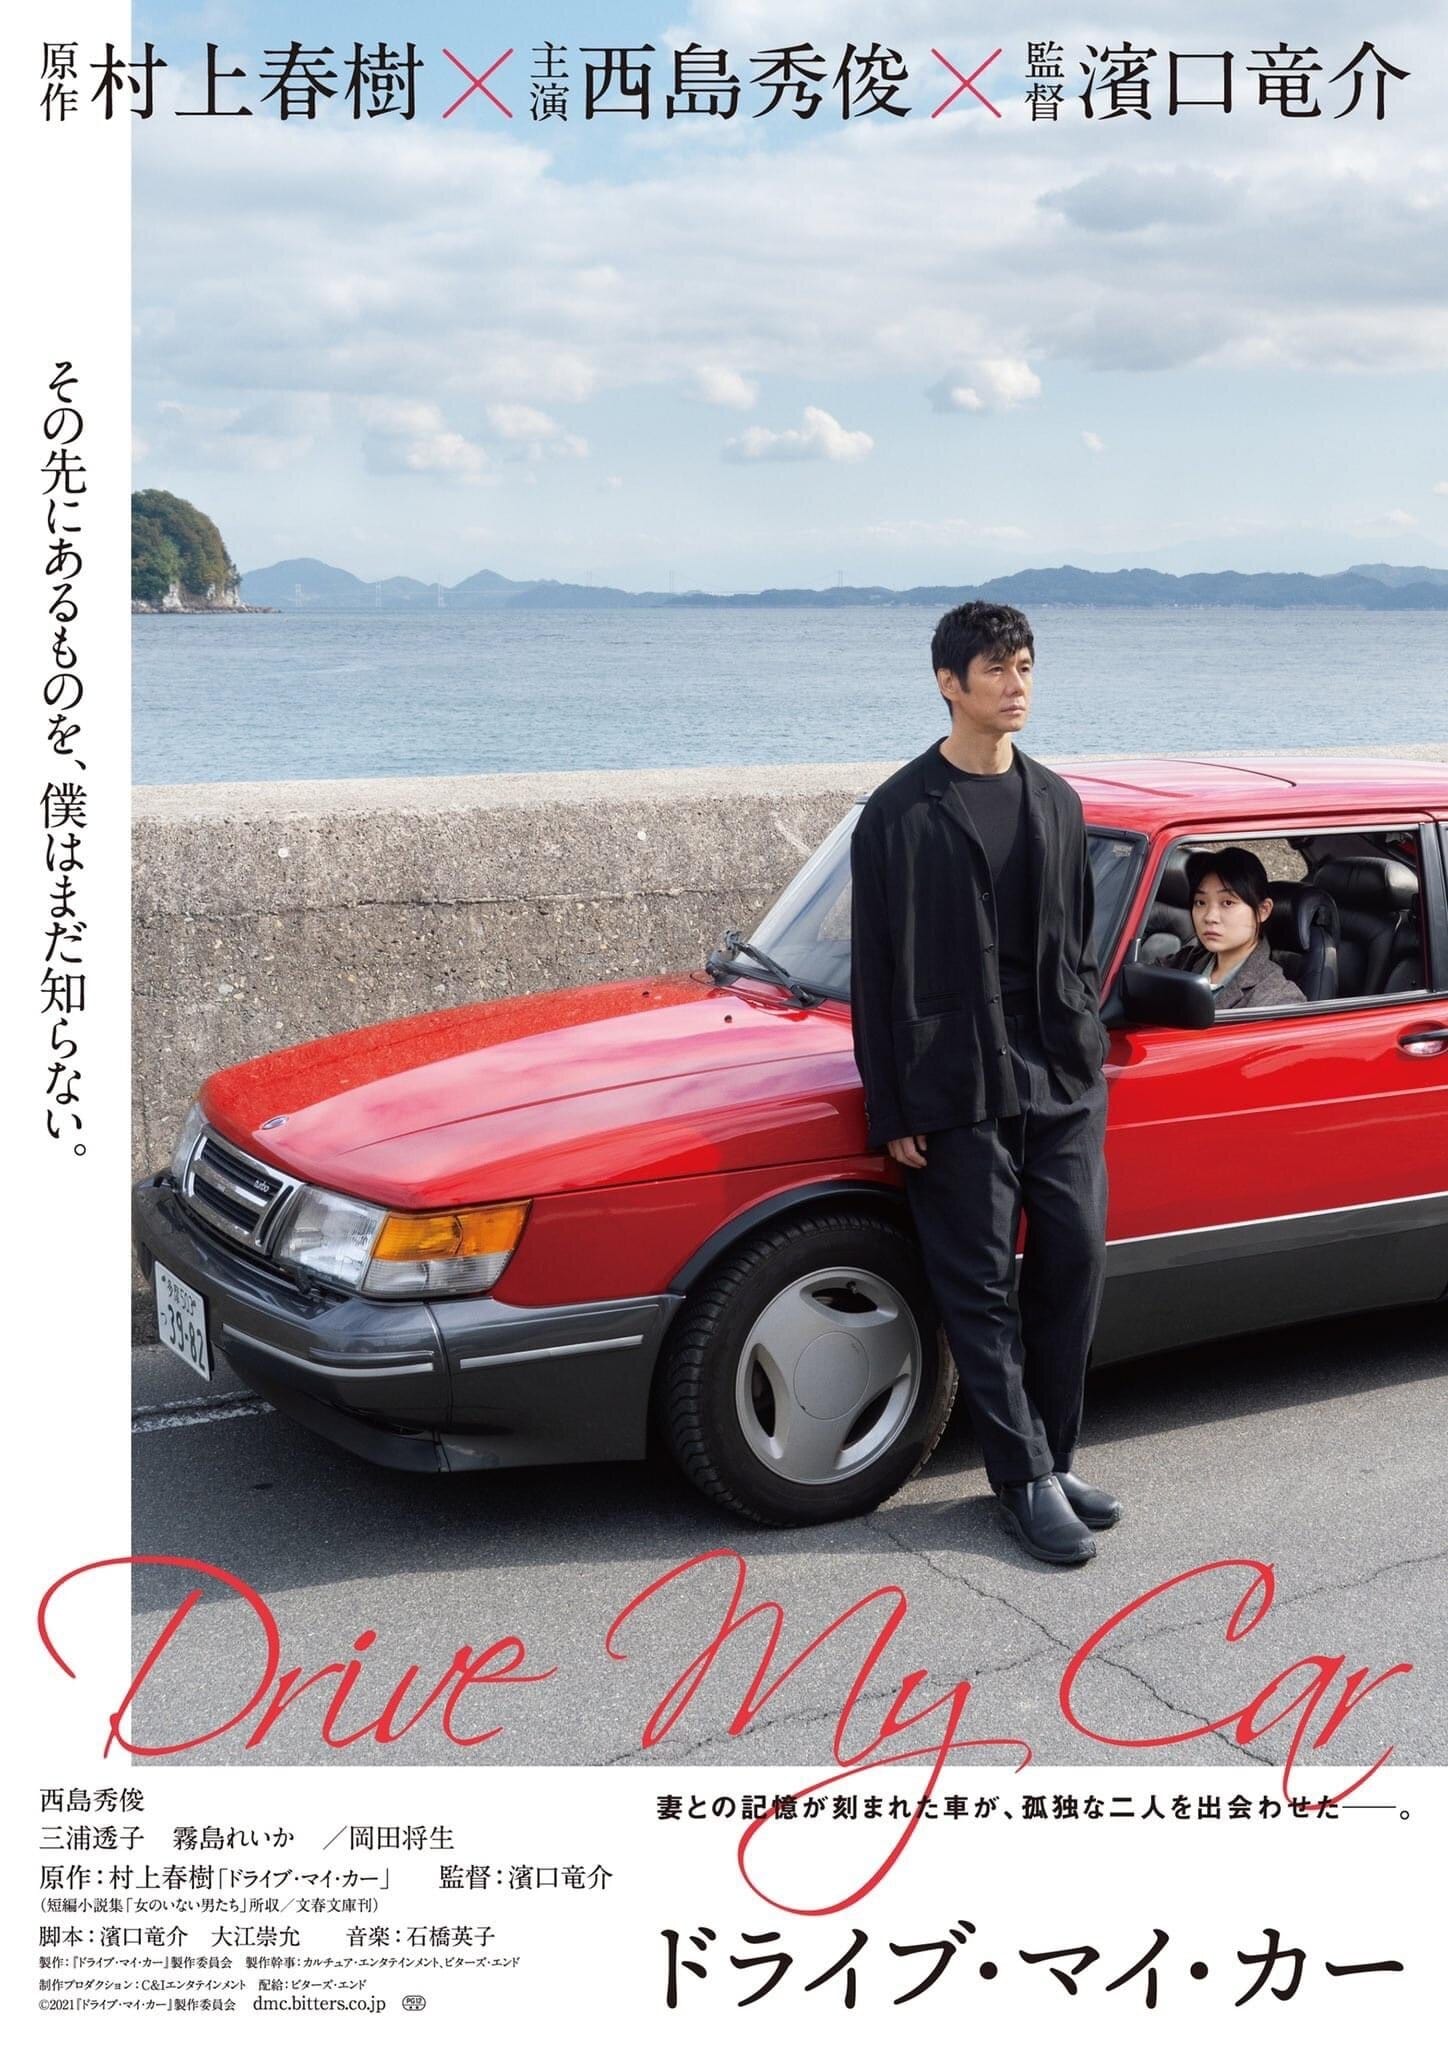 Download JAPANESE movie Drive My Car